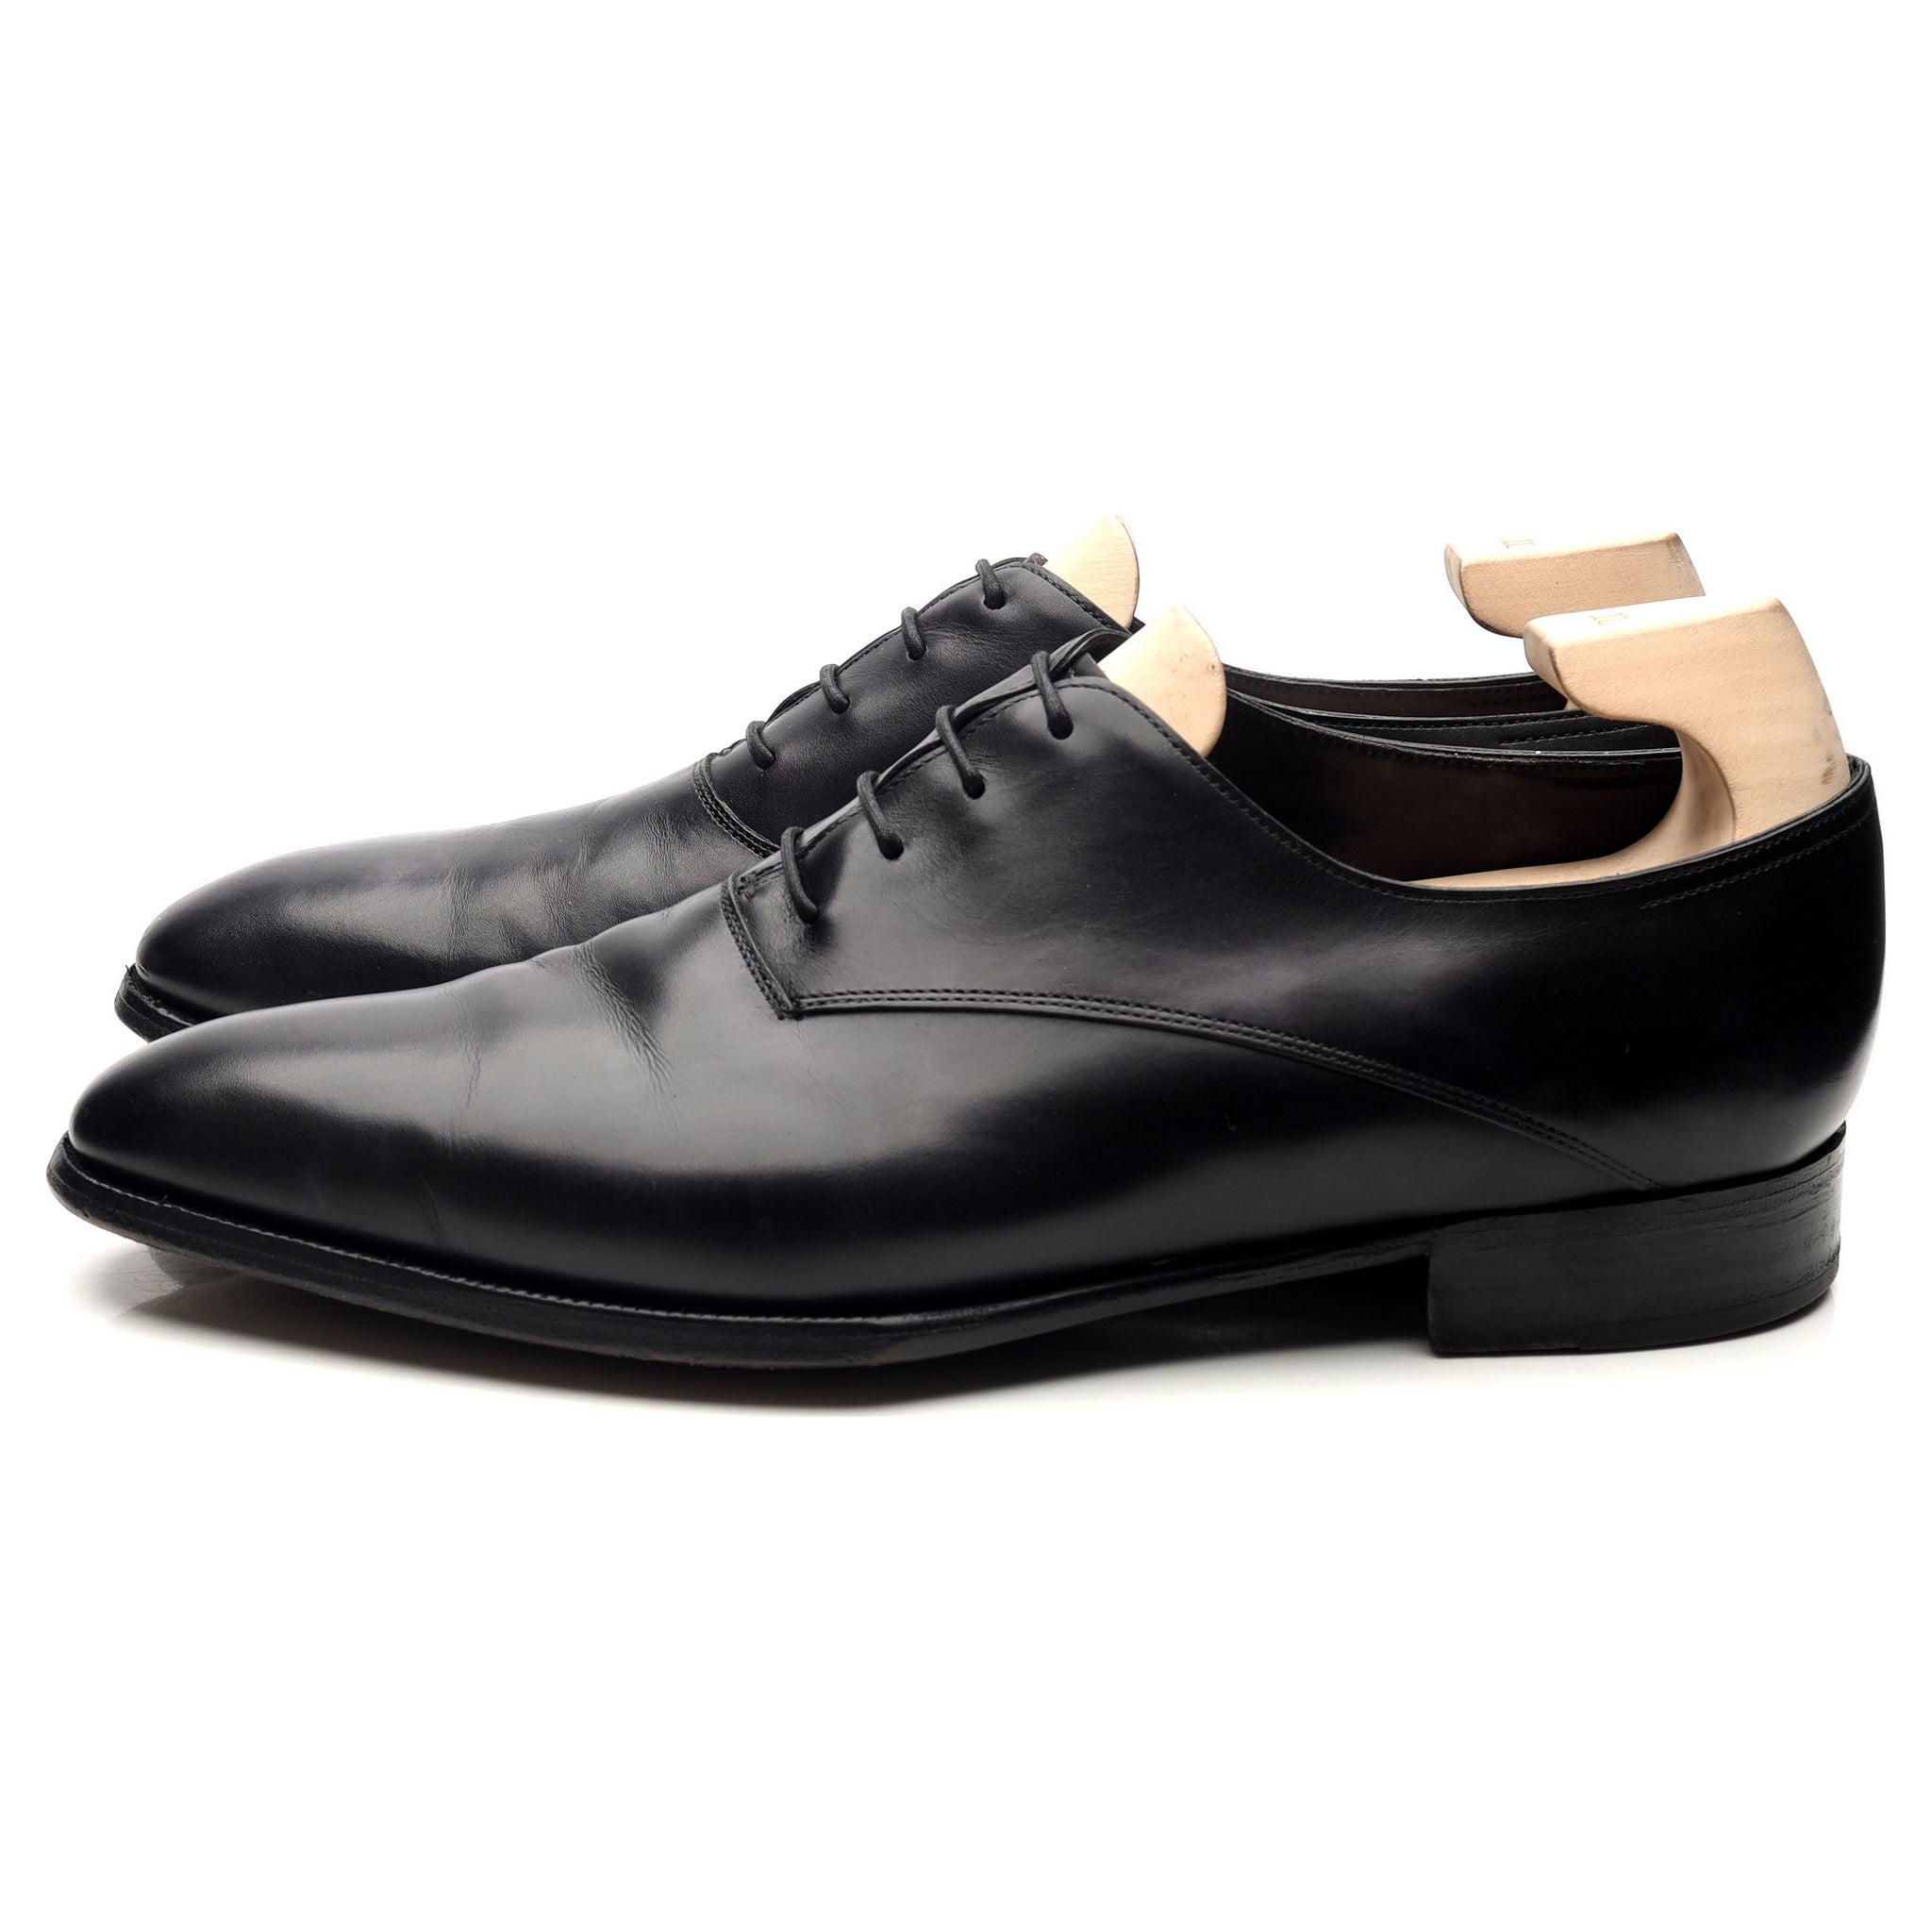 Becketts' Black Museum Leather Oxford UK 9 E - Abbot's Shoes